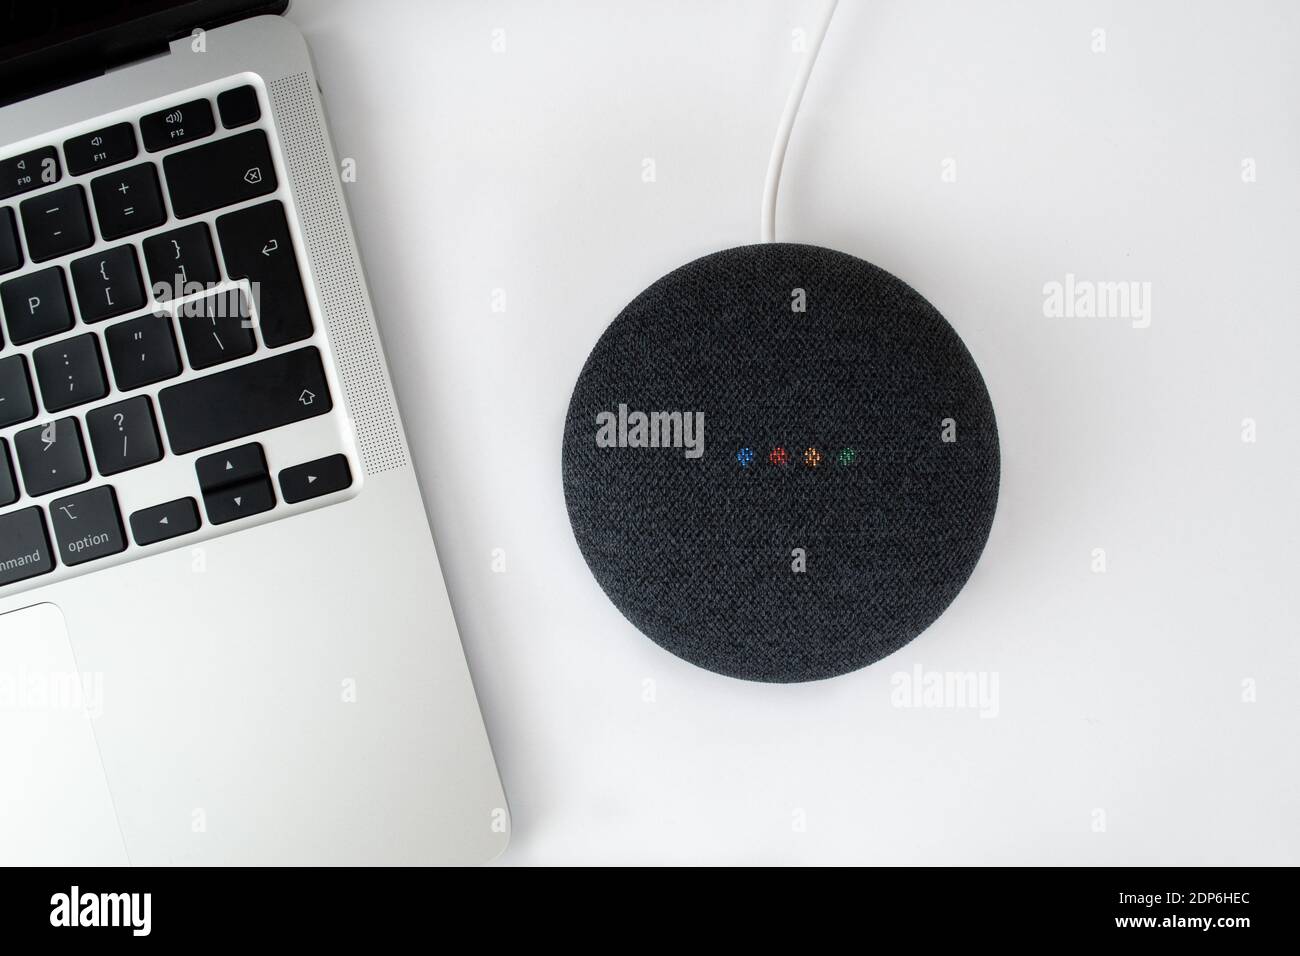 London, United Kingdom - 19 December 2020: Charcoal Google Nest Home Mini smart speaker with built in Google Assistant next to a laptop computer. Stock Photo